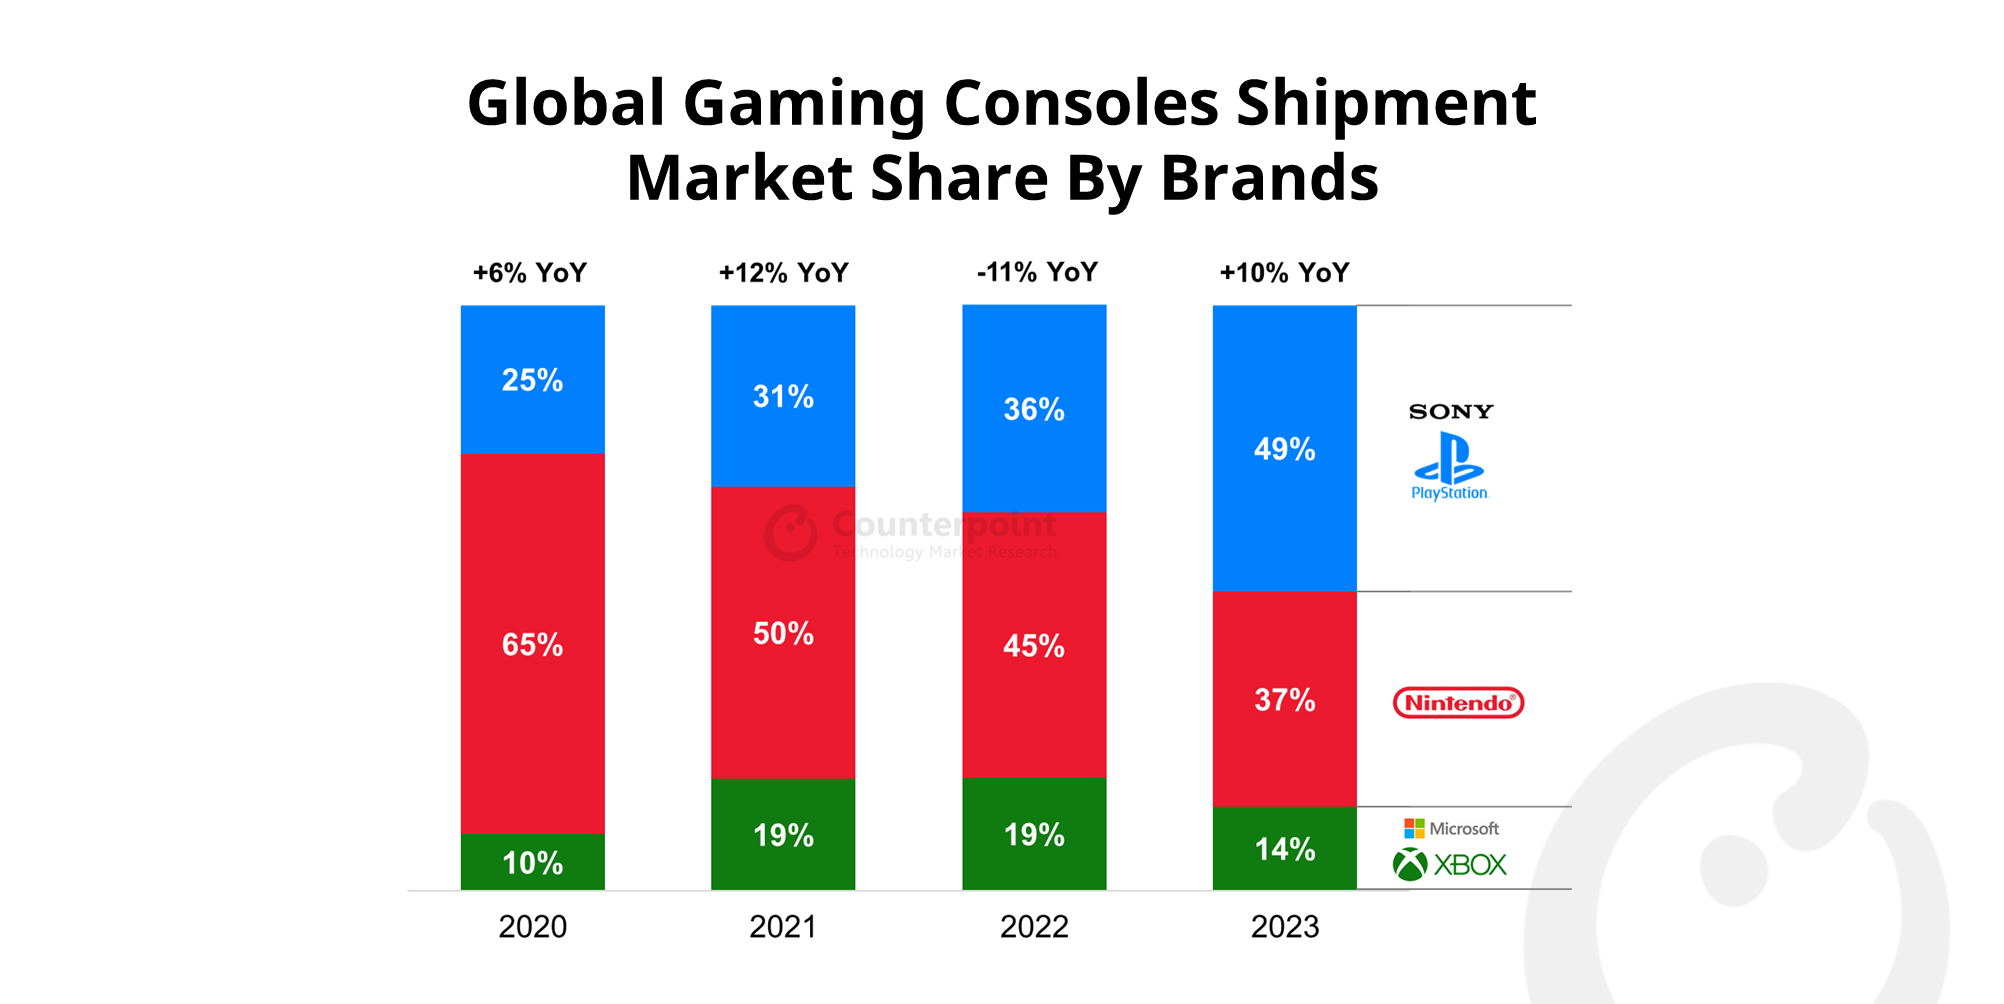 Global Gaming Consoles Shipment Market Share By Brands